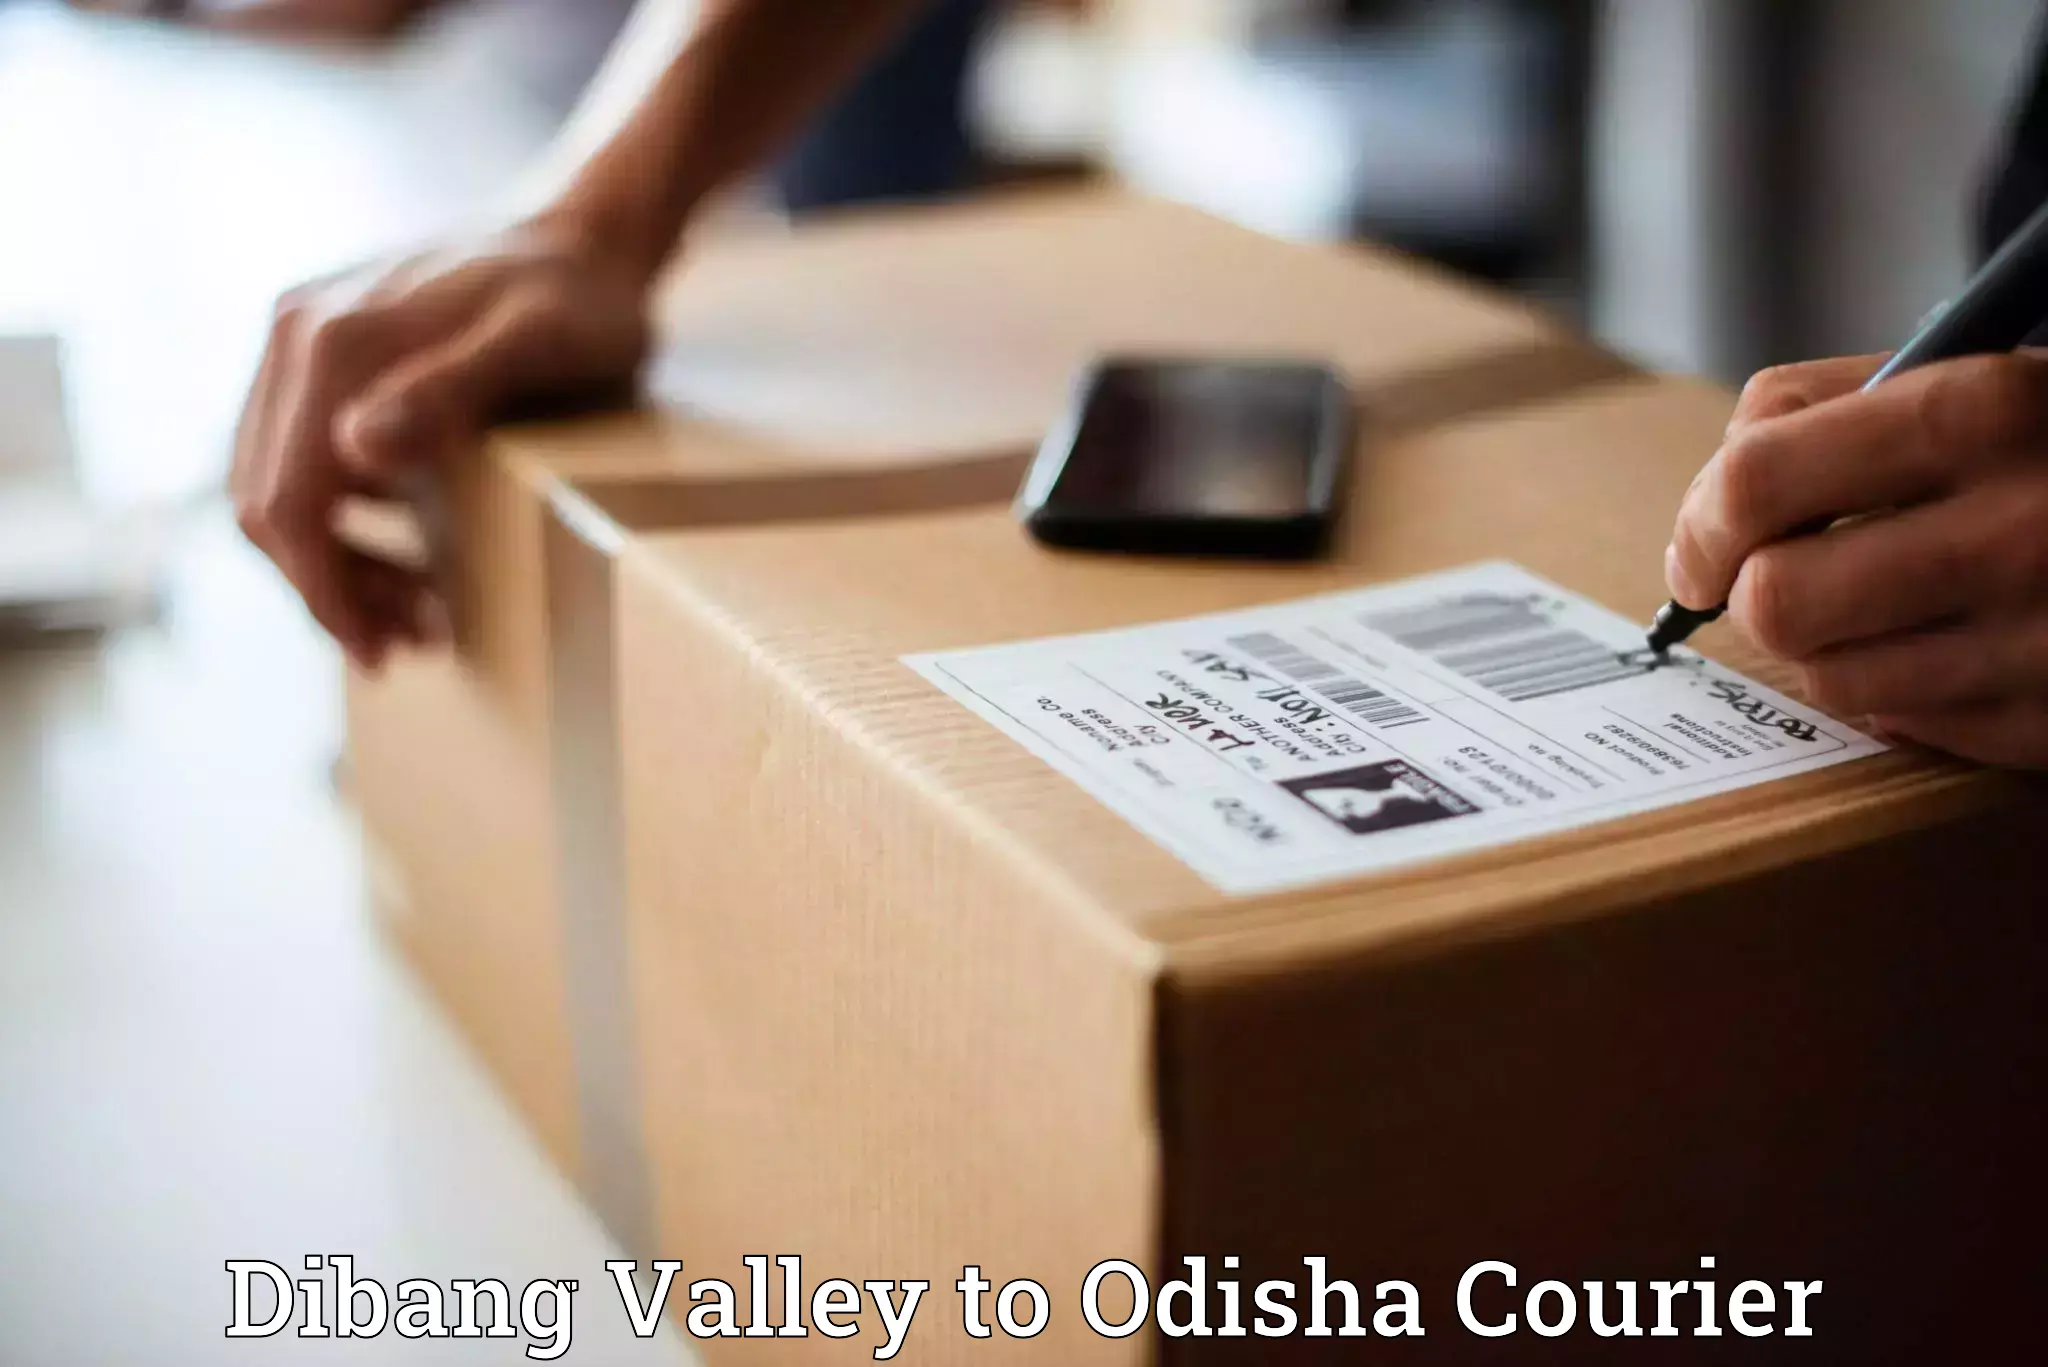 Courier service efficiency Dibang Valley to Jaleswar